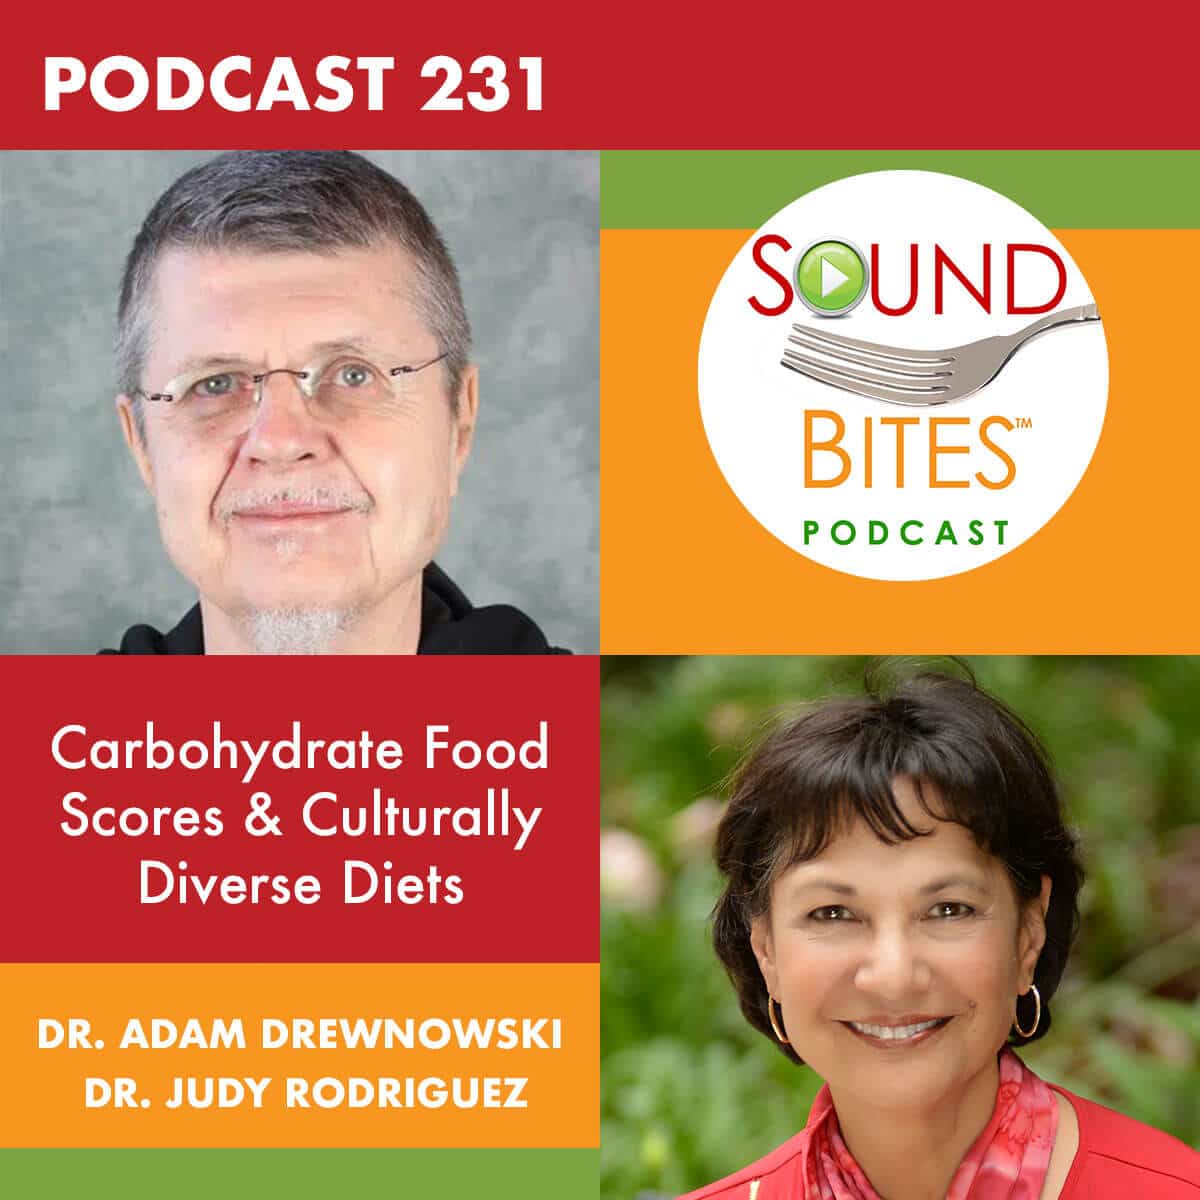 Podcast Episode 231: Carbohydrate Food Scores & Culturally Diverse Diets – Dr. Adam Drewnowski & Dr. Judy Rodriguez